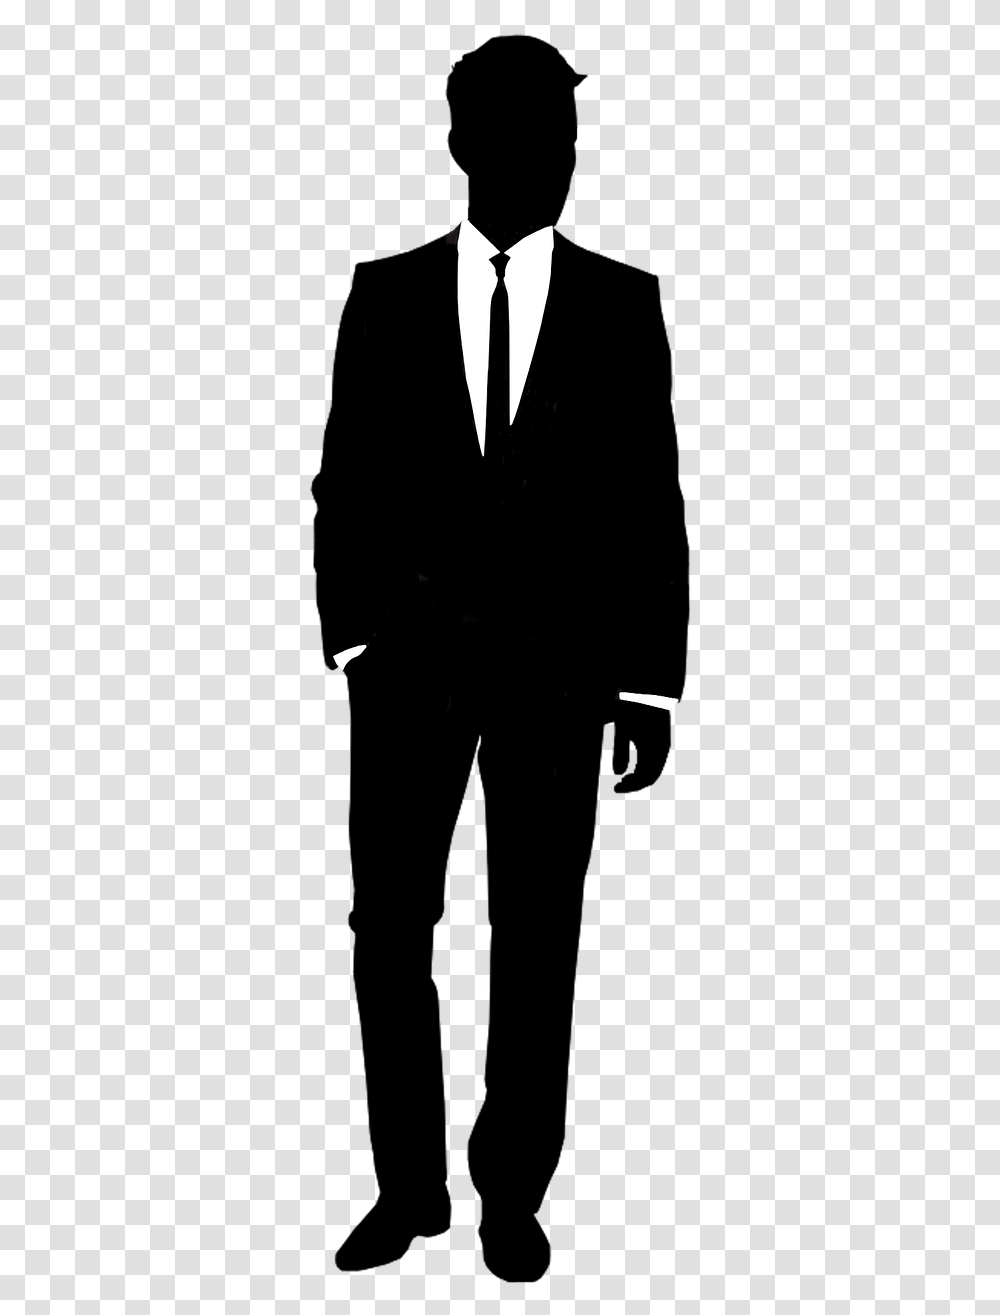 In Tux Silhouette At Fashion Man Clipart, Person, Musician, Musical Instrument, Leisure Activities Transparent Png